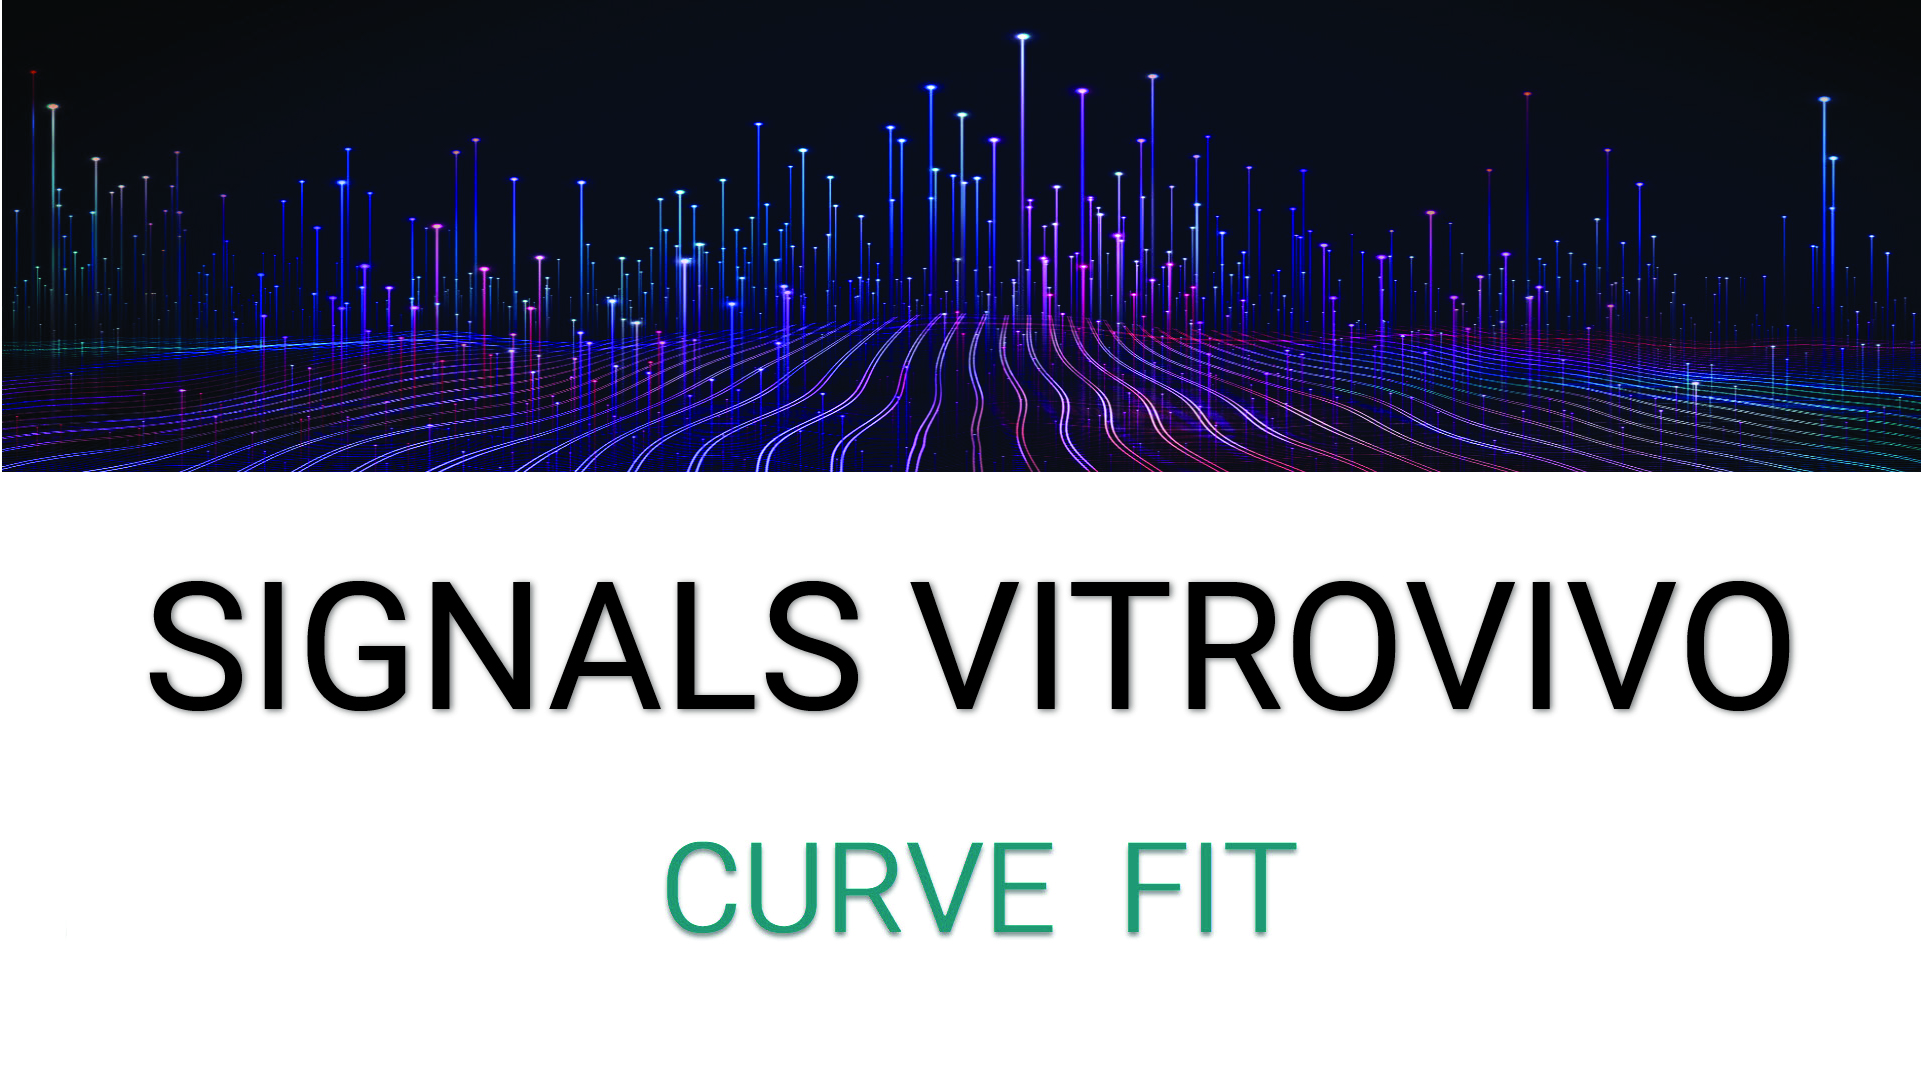 Watch Signals Vitro Vivo Features | 4 Part Video Series | Curve Fit or Calculations Explorer on YouTube.